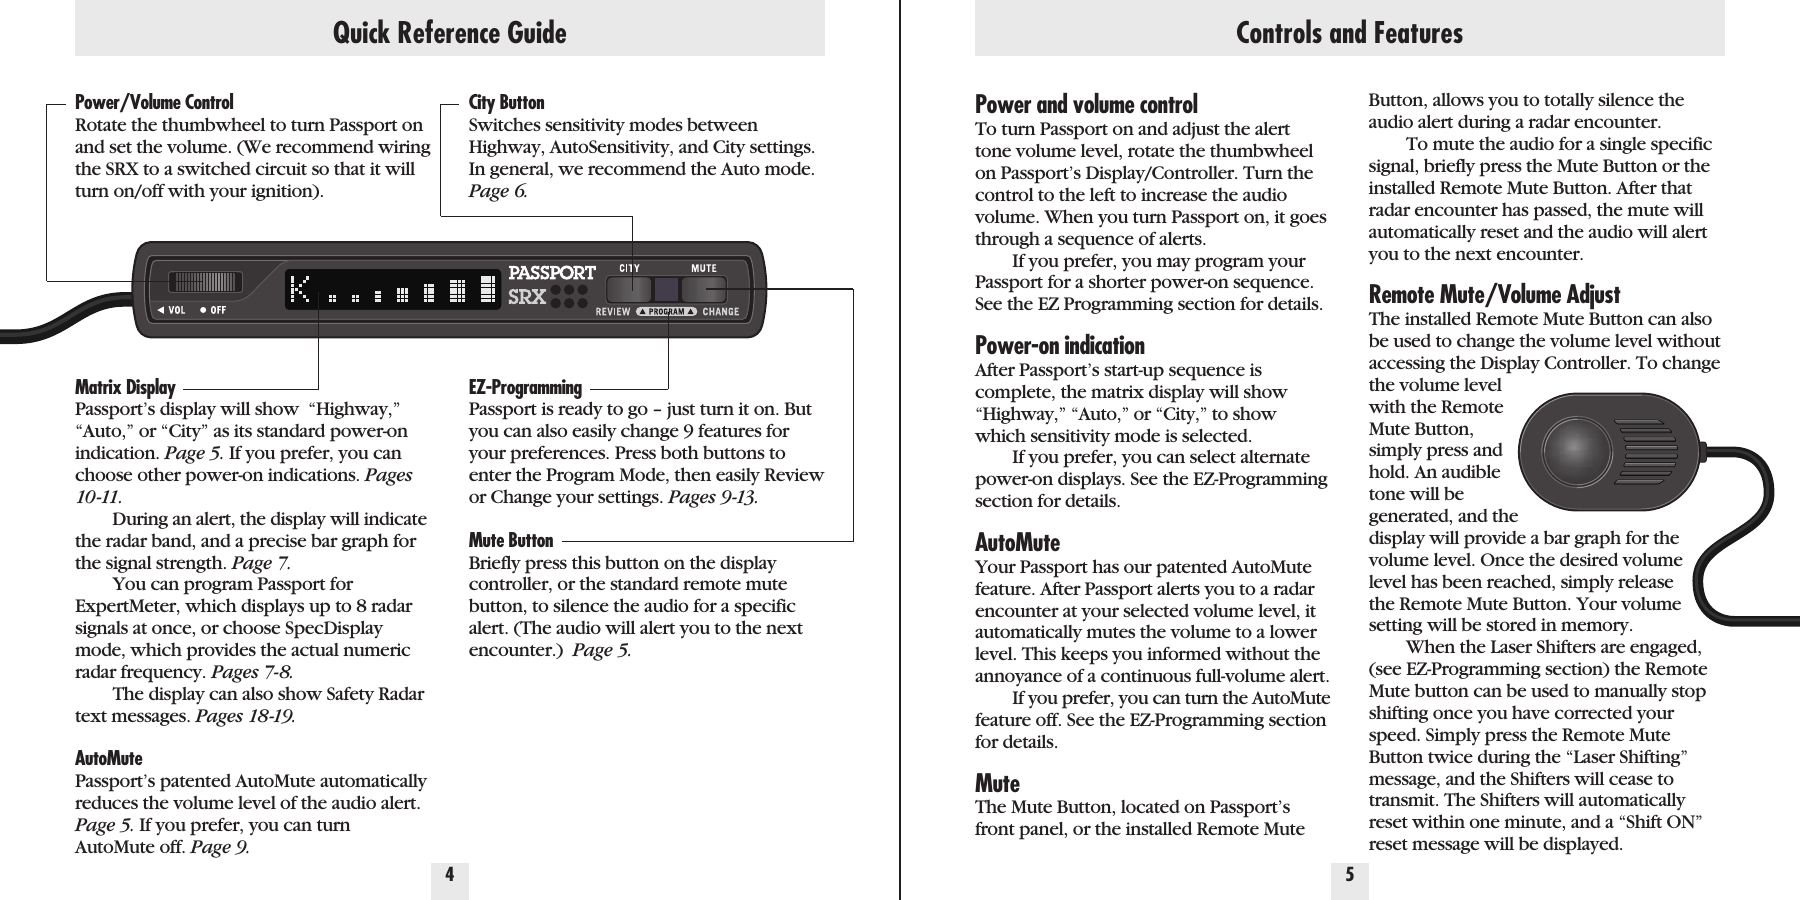 Power/Volume ControlRotate the thumbwheel to turn Passport onand set the volume. (We recommend wiringthe SRX to a switched circuit so that it willturn on/off with your ignition).Matrix DisplayPassport’s display will show  “Highway,”“Auto,” or “City” as its standard power-onindication. Page 5. If you prefer, you canchoose other power-on indications. Pages10 -11.During an alert, the display will indicatethe radar band, and a precise bar graph forthe signal strength. Page 7.You can program Passport forExpertMeter, which displays up to 8 radarsignals at once, or choose SpecDisplaymode, which provides the actual numericradar frequency. Pages 7-8.The display can also show Safety Radartext messages. Pages 18-19.AutoMutePassport’s patented AutoMute automaticallyreduces the volume level of the audio alert.Page 5. If you prefer, you can turnAutoMute off. Page 9.City ButtonSwitches sensitivity modes betweenHighway, AutoSensitivity, and City settings.In general, we recommend the Auto mode.Page 6.EZ-ProgrammingPassport is ready to go – just turn it on. Butyou can also easily change 9 features foryour preferences. Press both buttons toenter the Program Mode, then easily Reviewor Change your settings. Pages 9-13.Mute ButtonBriefly press this button on the displaycontroller, or the standard remote mutebutton, to silence the audio for a specificalert. (The audio will alert you to the nextencounter.)  Page 5.Quick Reference Guide4 5Power and volume controlTo turn Passport on and adjust the alerttone volume level, rotate the thumbwheelon Passport’s Display/Controller. Turn thecontrol to the left to increase the audiovolume. When you turn Passport on, it goesthrough a sequence of alerts.If you prefer, you may program yourPassport for a shorter power-on sequence.See the EZ Programming section for details.Power-on indicationAfter Passport’s start-up sequence iscomplete, the matrix display will show“Highway,” “Auto,” or “City,” to showwhich sensitivity mode is selected. If you prefer, you can select alternatepower-on displays. See the EZ-Programmingsection for details.AutoMuteYour Passport has our patented AutoMutefeature. After Passport alerts you to a radarencounter at your selected volume level, itautomatically mutes the volume to a lowerlevel. This keeps you informed without theannoyance of a continuous full-volume alert.If you prefer, you can turn the AutoMutefeature off. See the EZ-Programming sectionfor details.MuteThe Mute Button, located on Passport’sfront panel, or the installed Remote MuteButton, allows you to totally silence theaudio alert during a radar encounter. To mute the audio for a single specificsignal, briefly press the Mute Button or theinstalled Remote Mute Button. After thatradar encounter has passed, the mute willautomatically reset and the audio will alertyou to the next encounter.Remote Mute/Volume AdjustThe installed Remote Mute Button can alsobe used to change the volume level withoutaccessing the Display Controller. To changethe volume levelwith the RemoteMute Button,simply press andhold. An audibletone will begenerated, and thedisplay will provide a bar graph for thevolume level. Once the desired volumelevel has been reached, simply releasethe Remote Mute Button. Your volumesetting will be stored in memory. When the Laser Shifters are engaged,(see EZ-Programming section) the RemoteMute button can be used to manually stopshifting once you have corrected yourspeed. Simply press the Remote MuteButton twice during the “Laser Shifting”message, and the Shifters will cease totransmit. The Shifters will automaticallyreset within one minute, and a “Shift ON”reset message will be displayed.Controls and Features